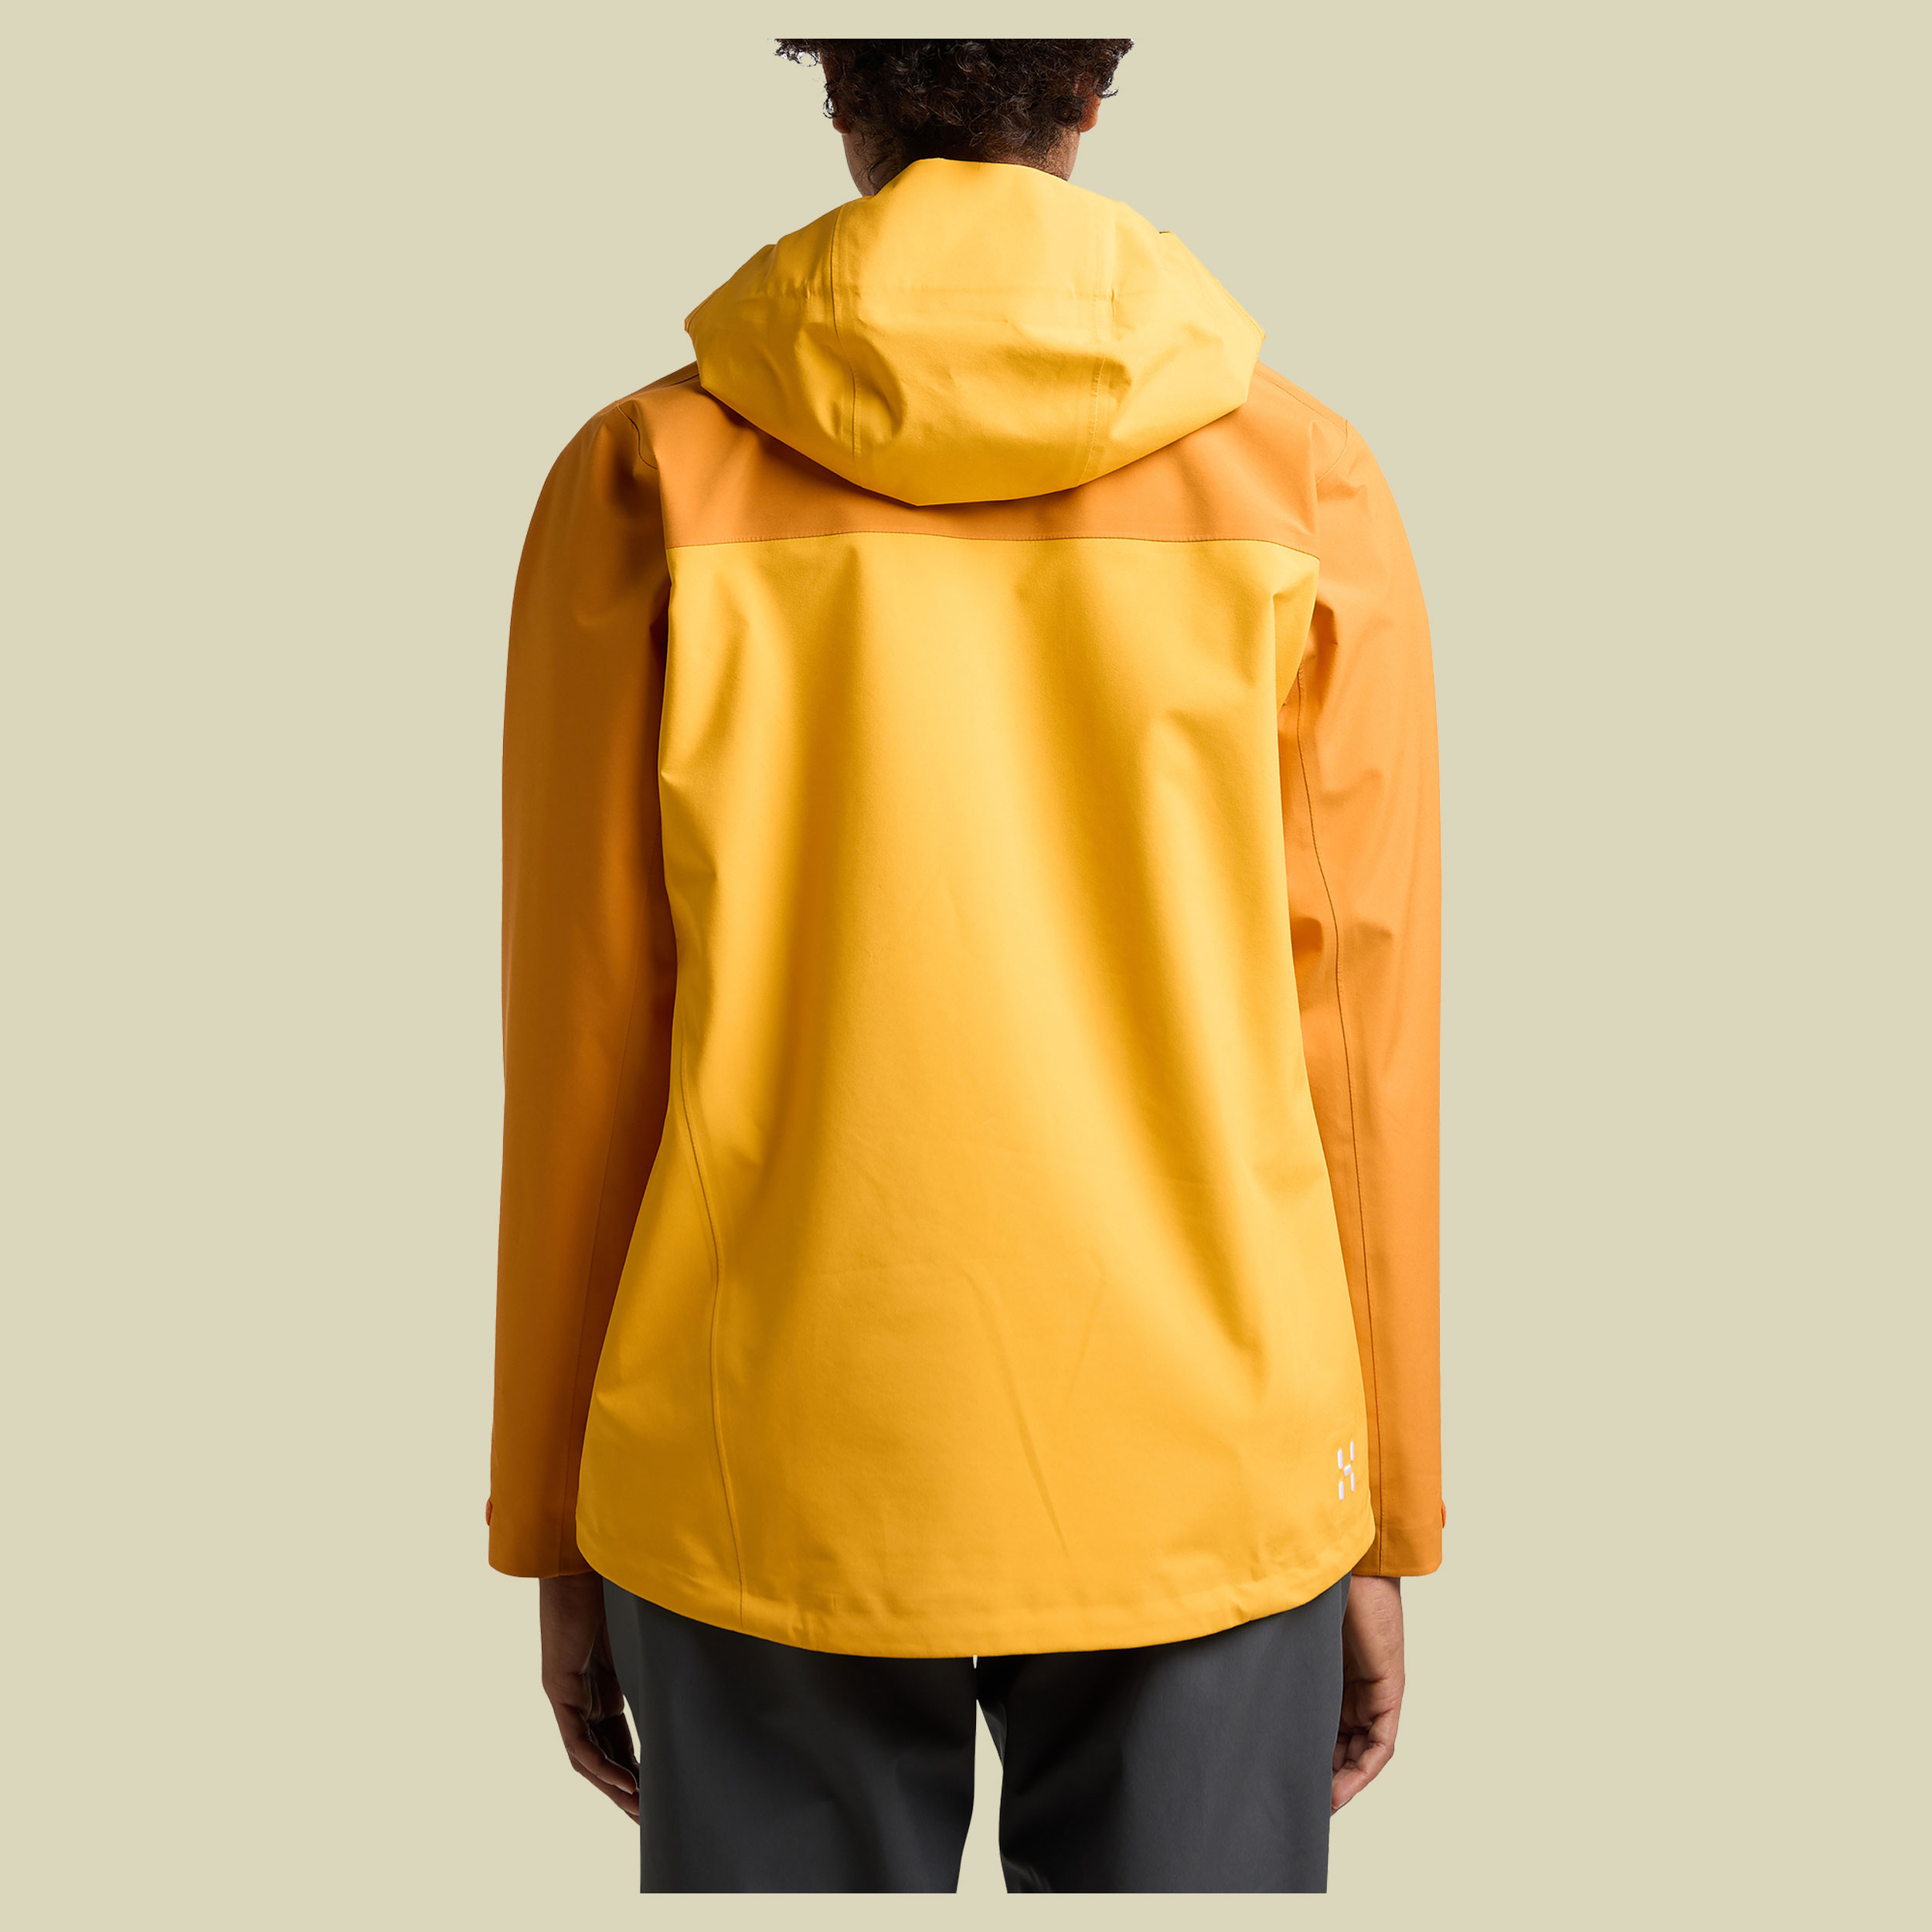 Front Proof Jacket Women Größe S Farbe sunny yellow/desert yellow